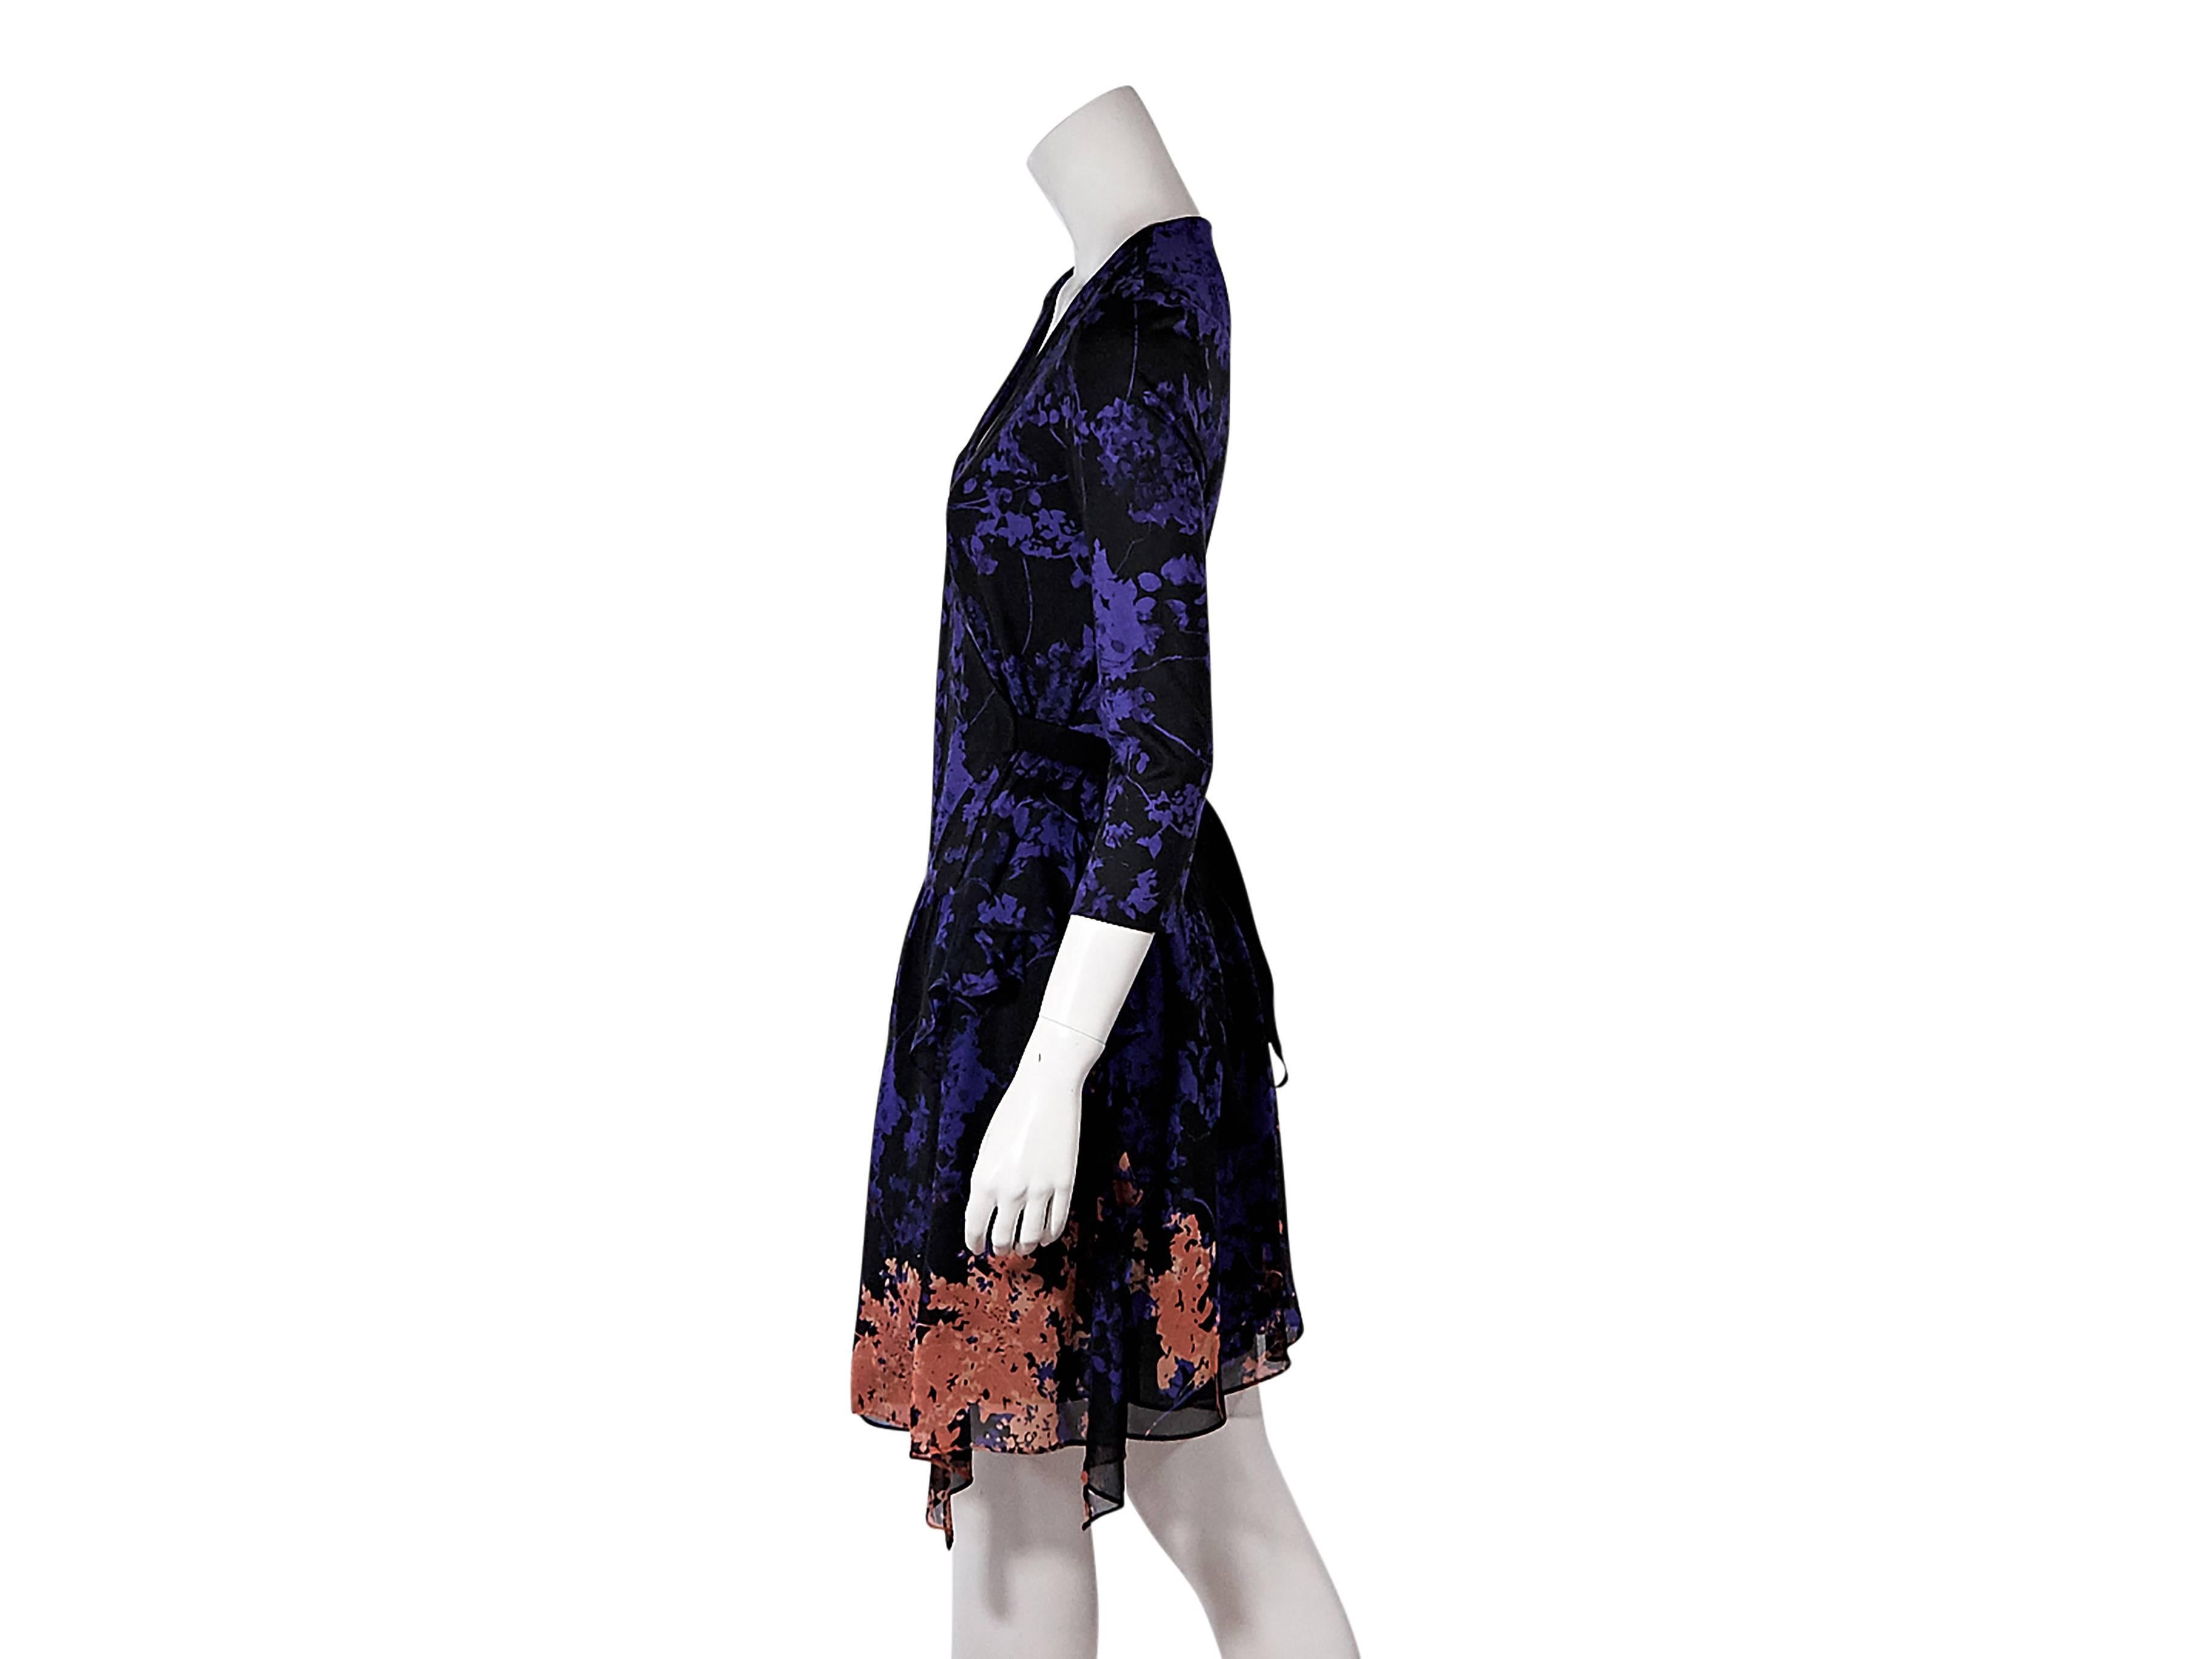 Product details:  Multicolor floral-print wrap dress by Diane von Furstenberg.  V-neck.  Three-quarter length sleeves.  Size 10
Condition: Pre-owned. Very good.

Est. Retail $ 525.00